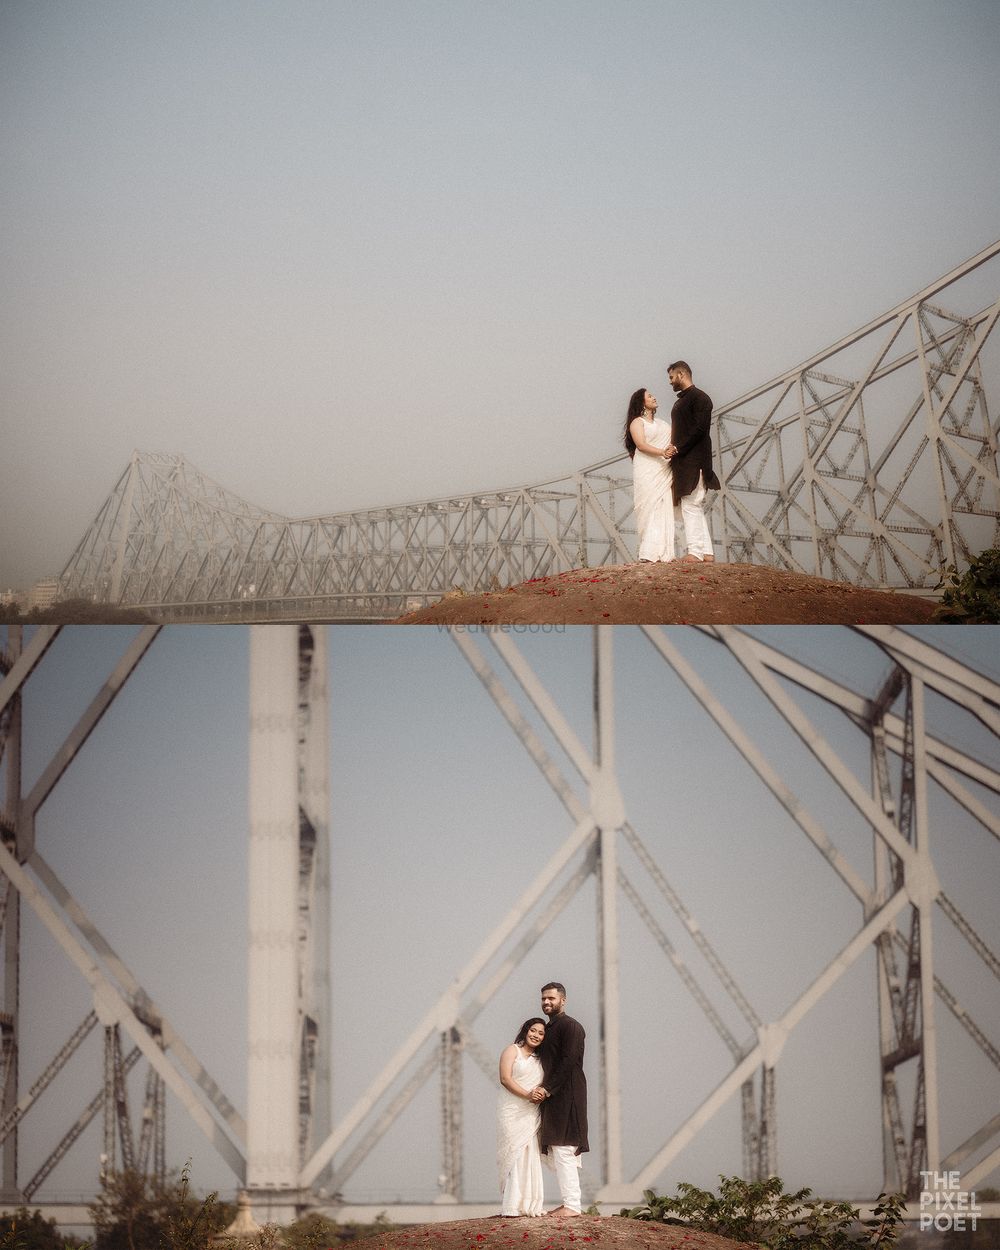 Photo From Rushali & Sourin - By The Pixel Poet